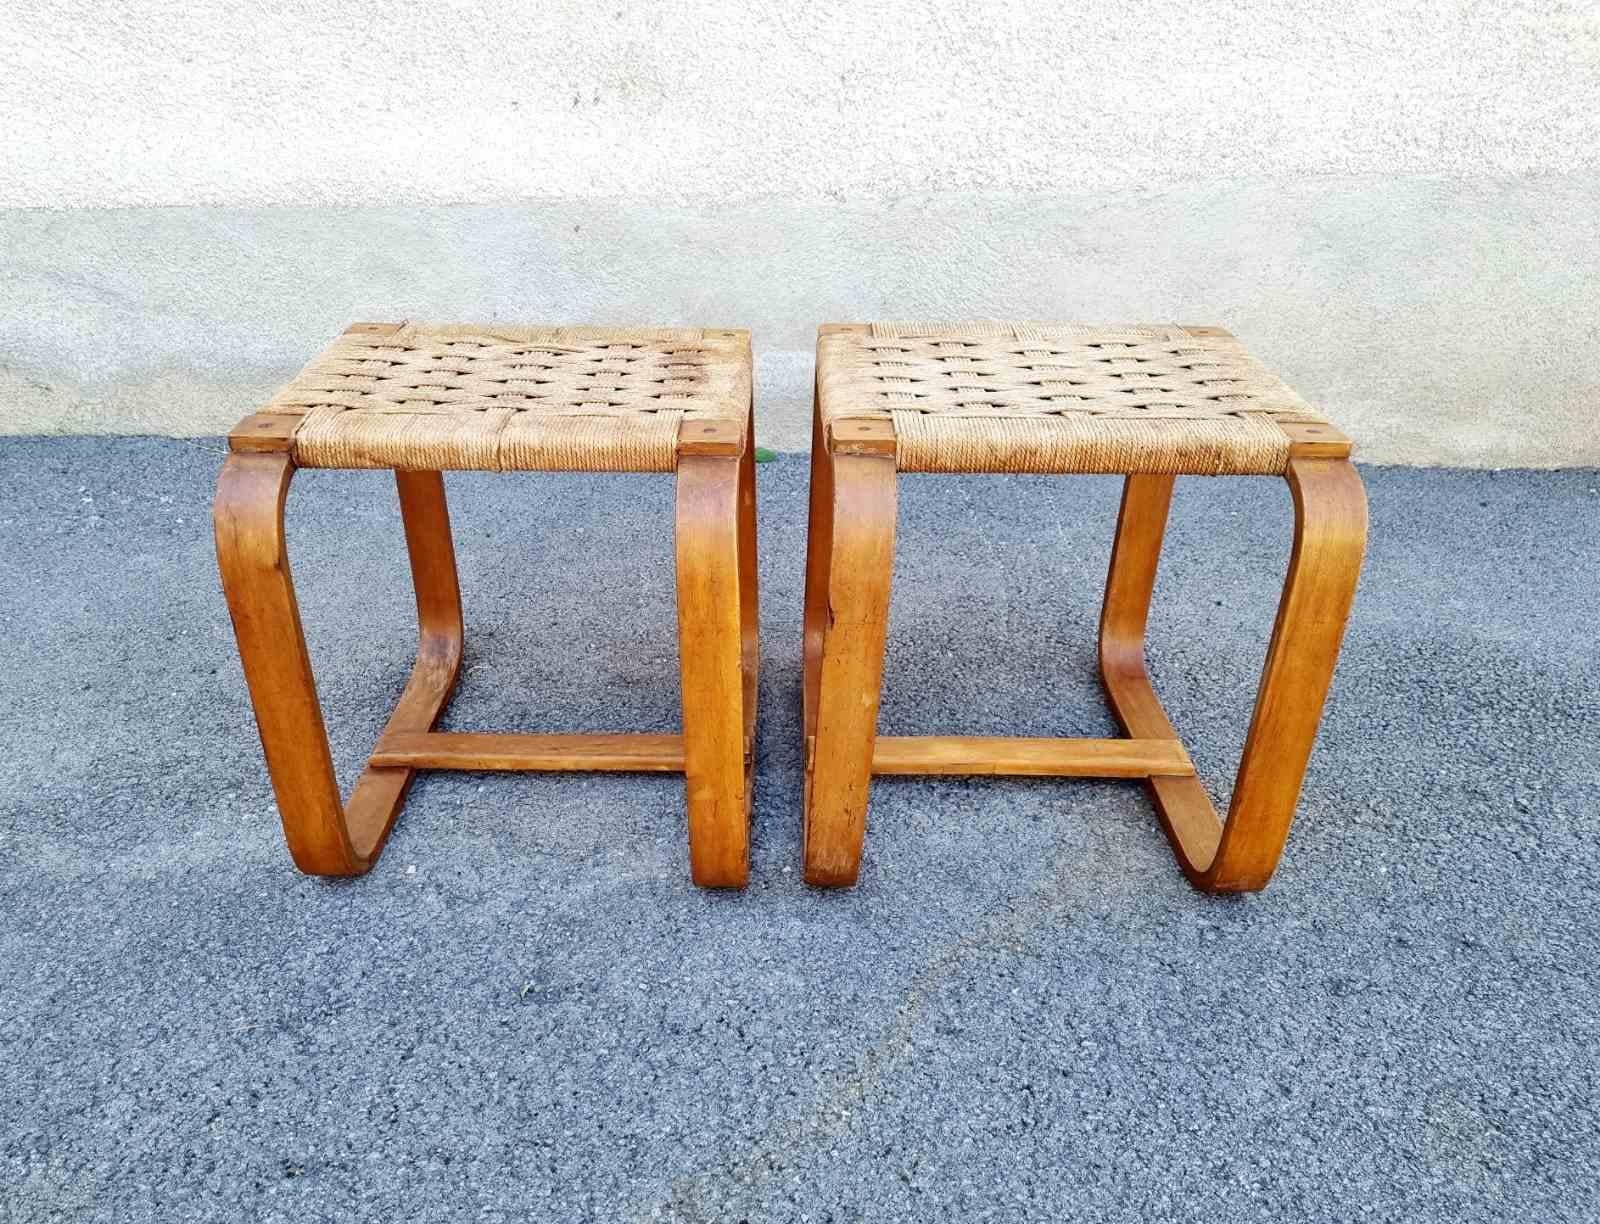 Rare Pair of Stools by Giuseppe Pagano Pogatschnig for Gino Maggioni, Italy 40s For Sale 5